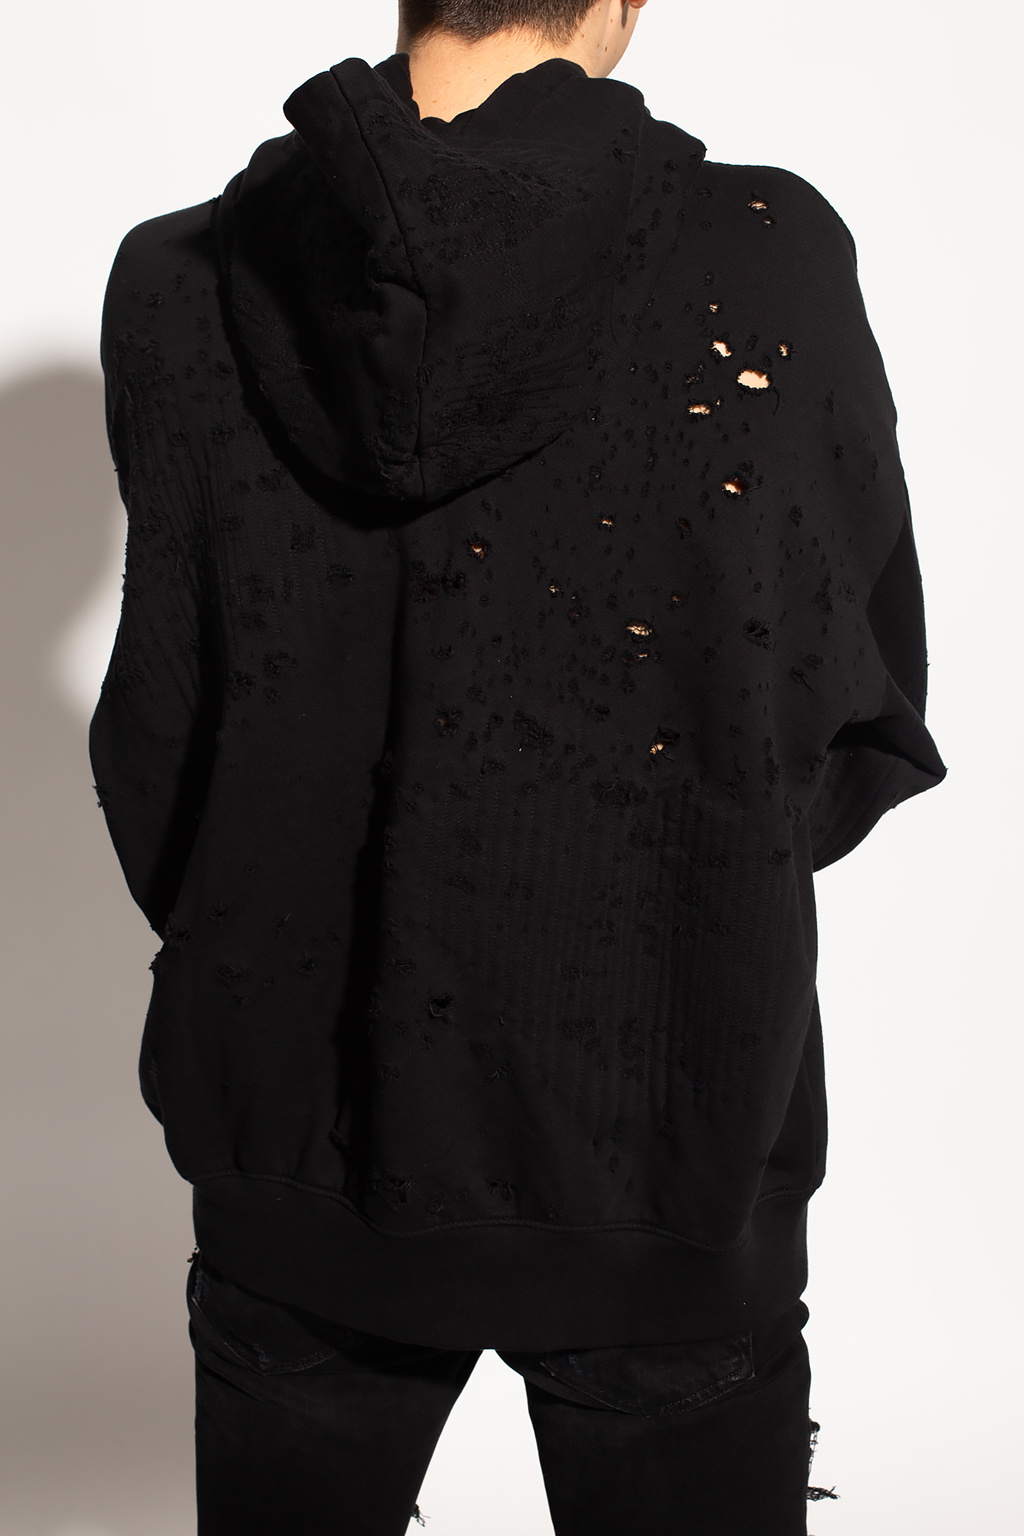 Amiri Hooded wool and cashmere sweater with long cuffed sleeves